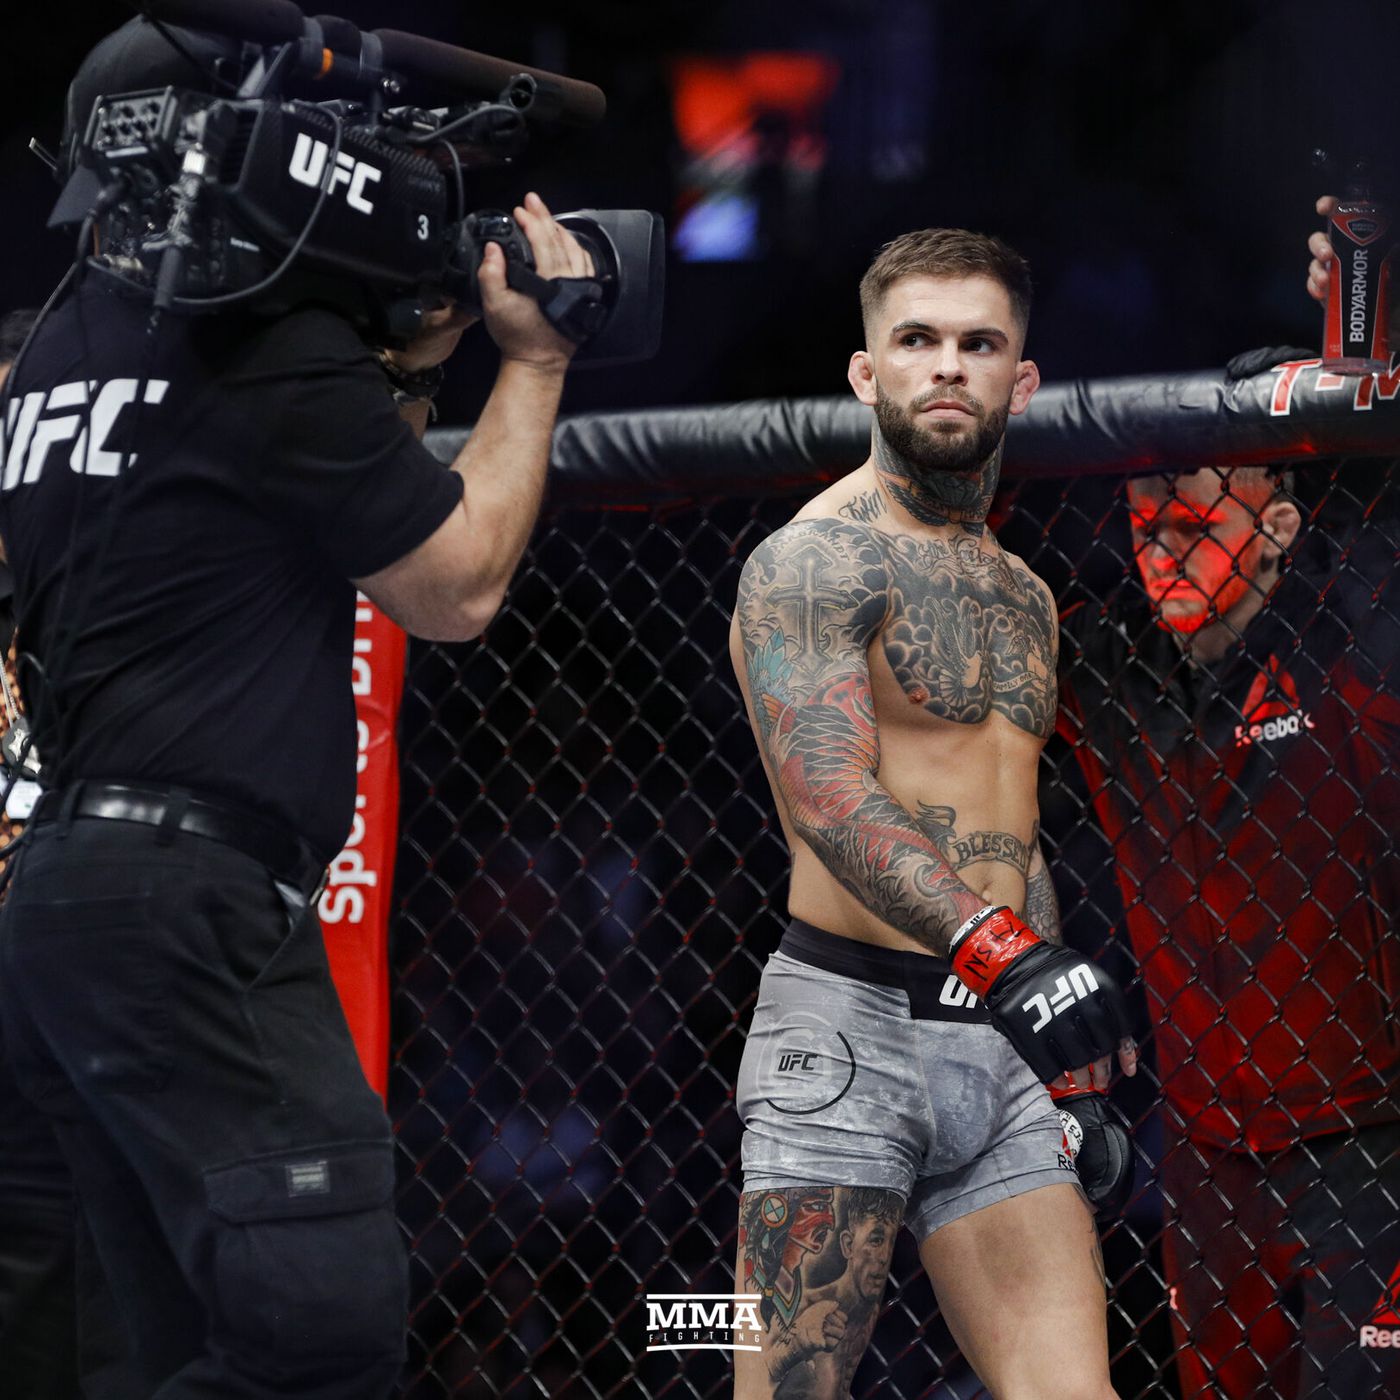 Cody Garbrandt releases statement after UFC 235 KO: 'Kill or be killed...